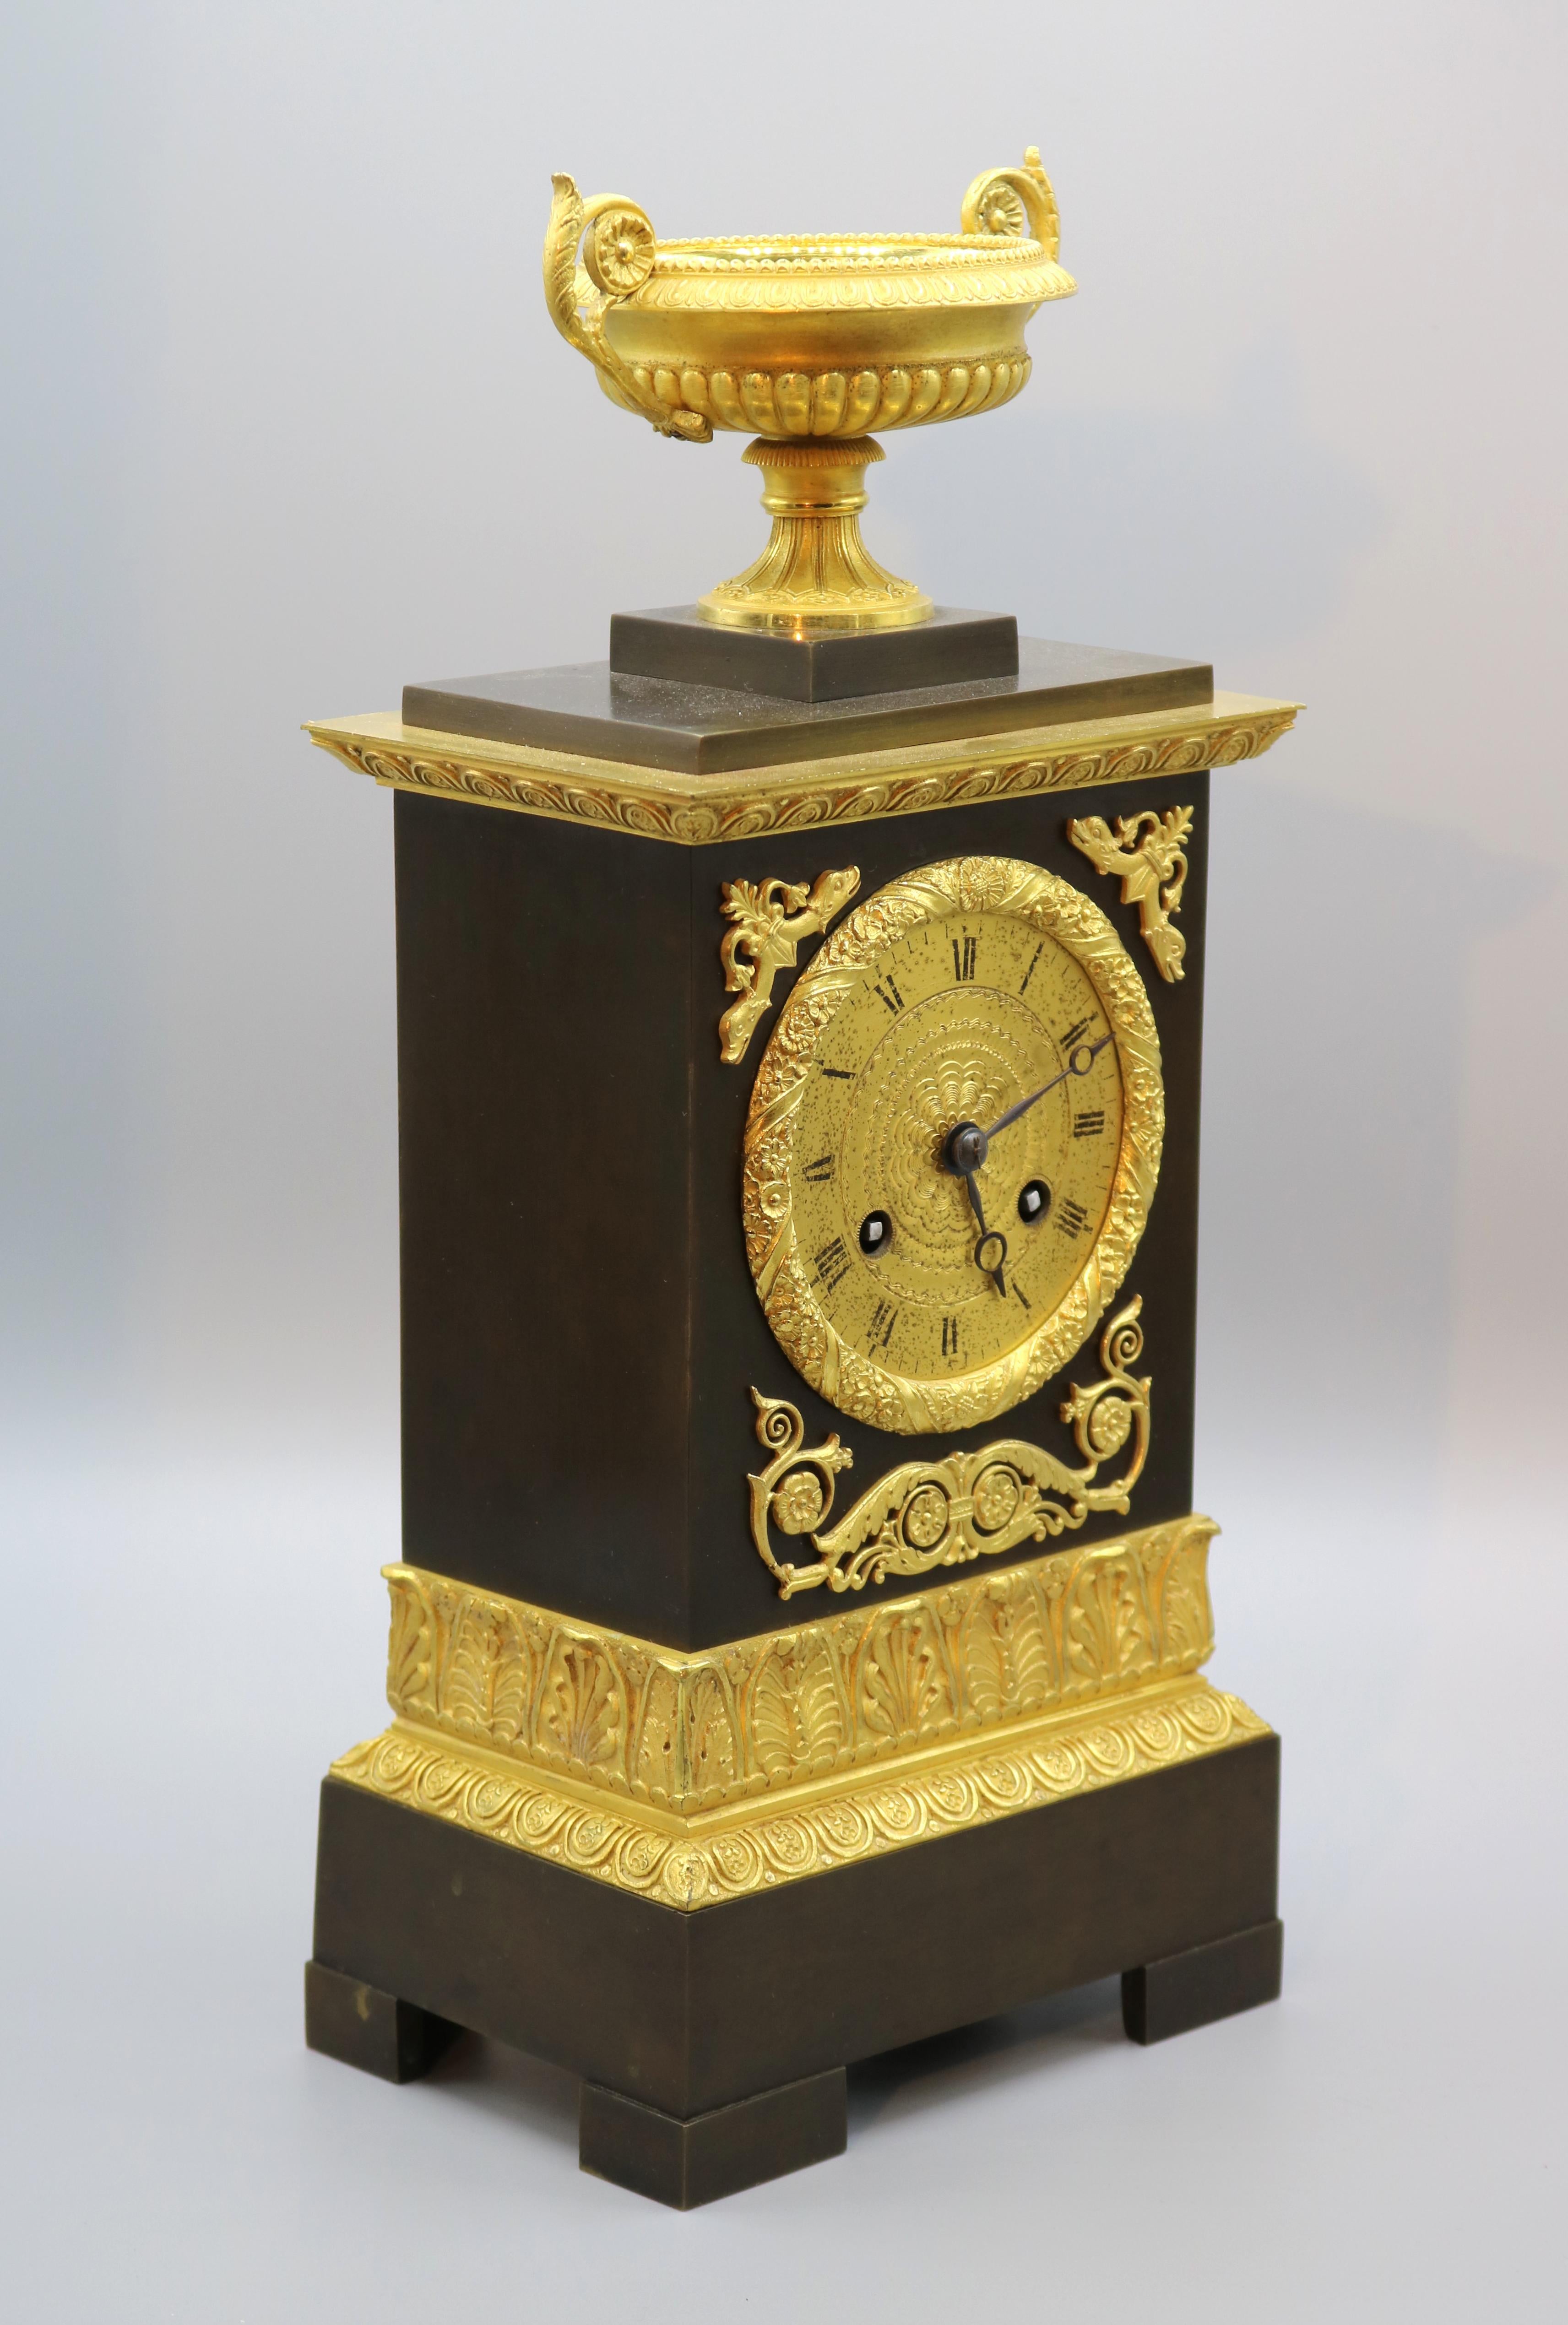 An early 19th century French bronze and ormolu eight day silk suspension striking clock contained in ornate case surmounted by well-cast and gadrooned urn with scroll carrying handles.